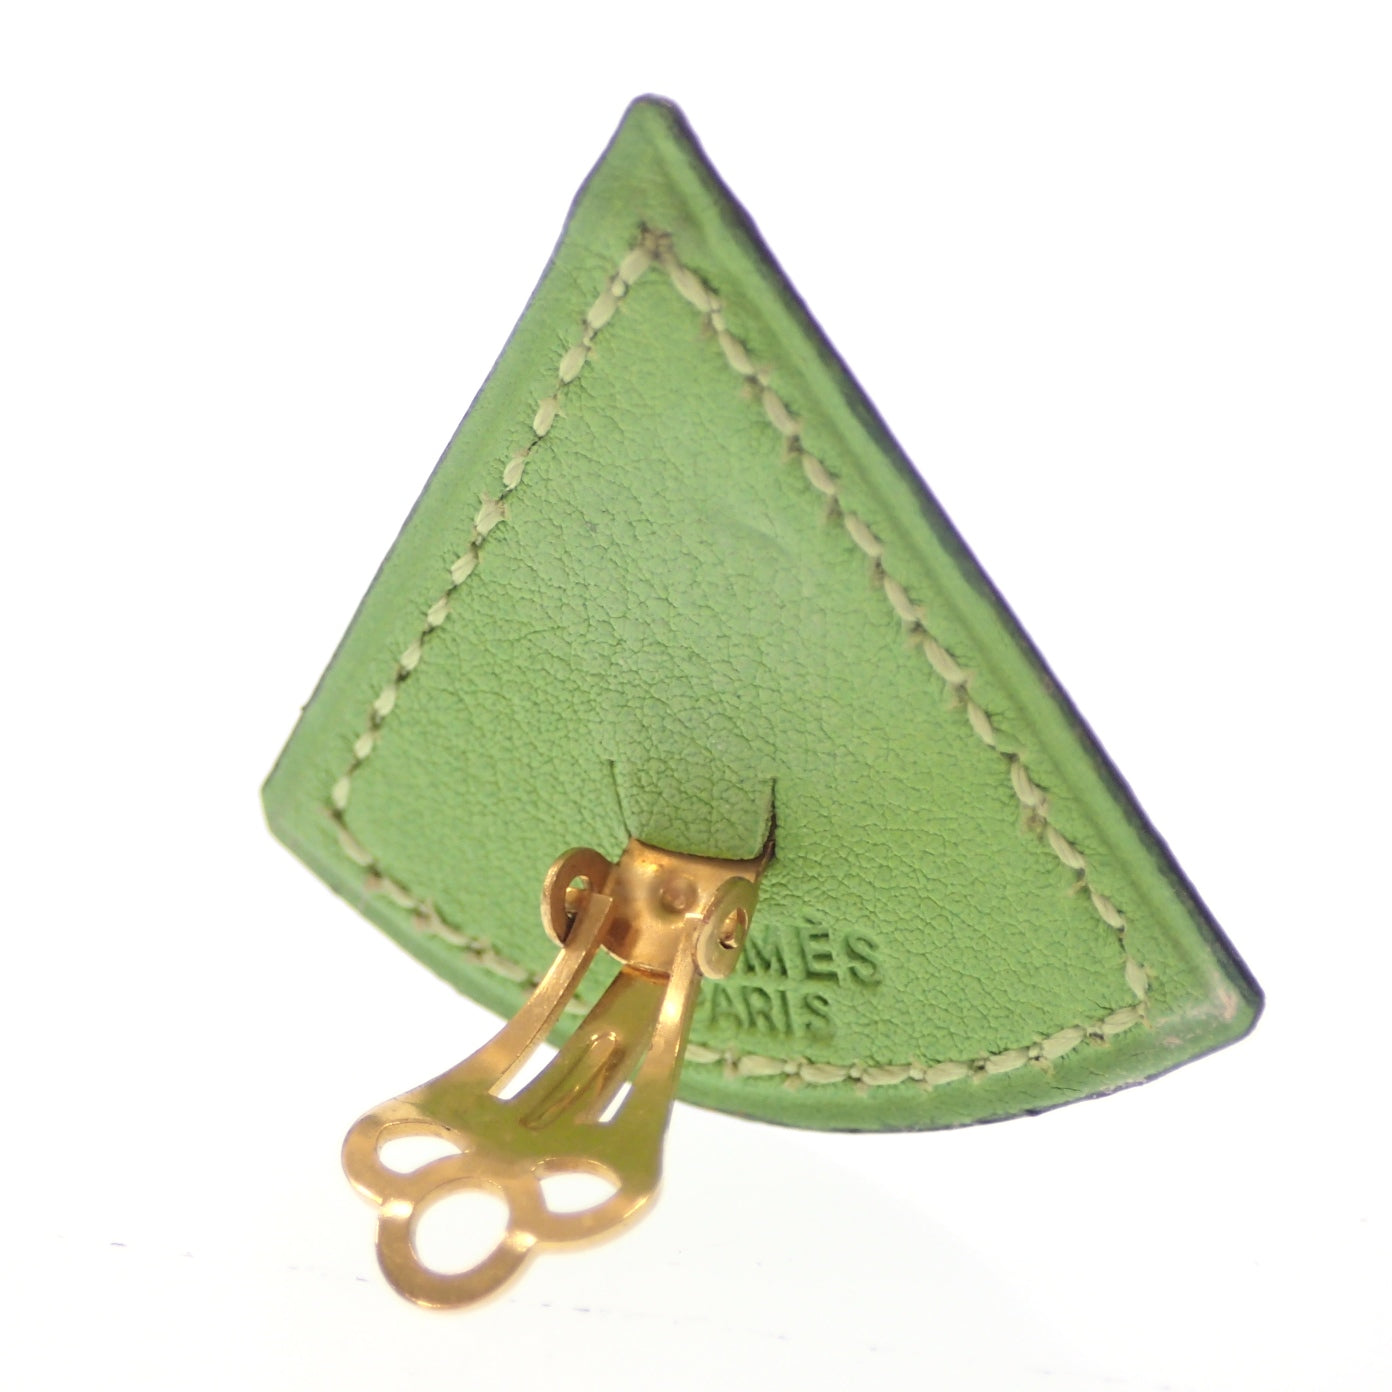 Hermes earrings triangle leather yellow green HERMES [AFI13] [Used] 